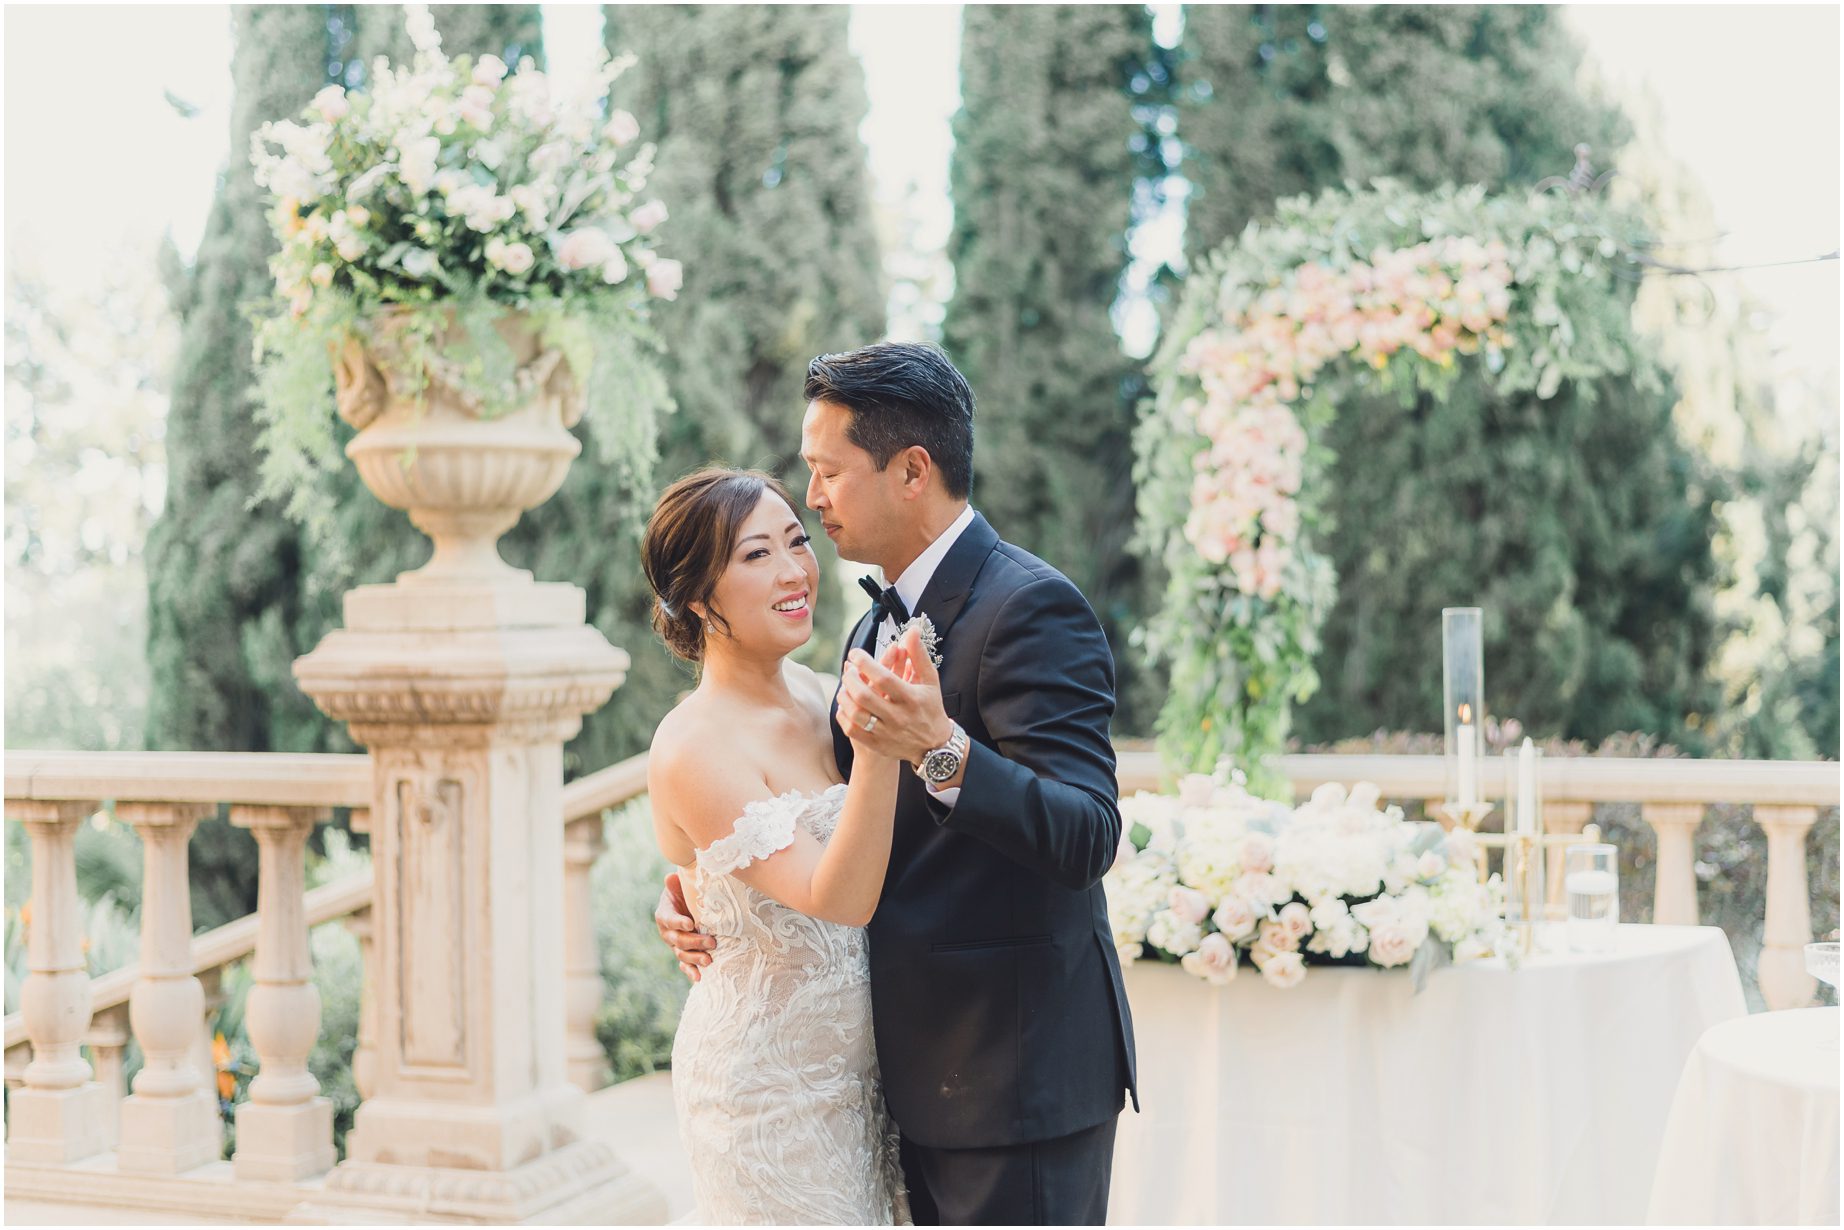 A couple shares a dreamy first dance next to their sweetheart table at Villa del sol d'Oro in Sierra madre